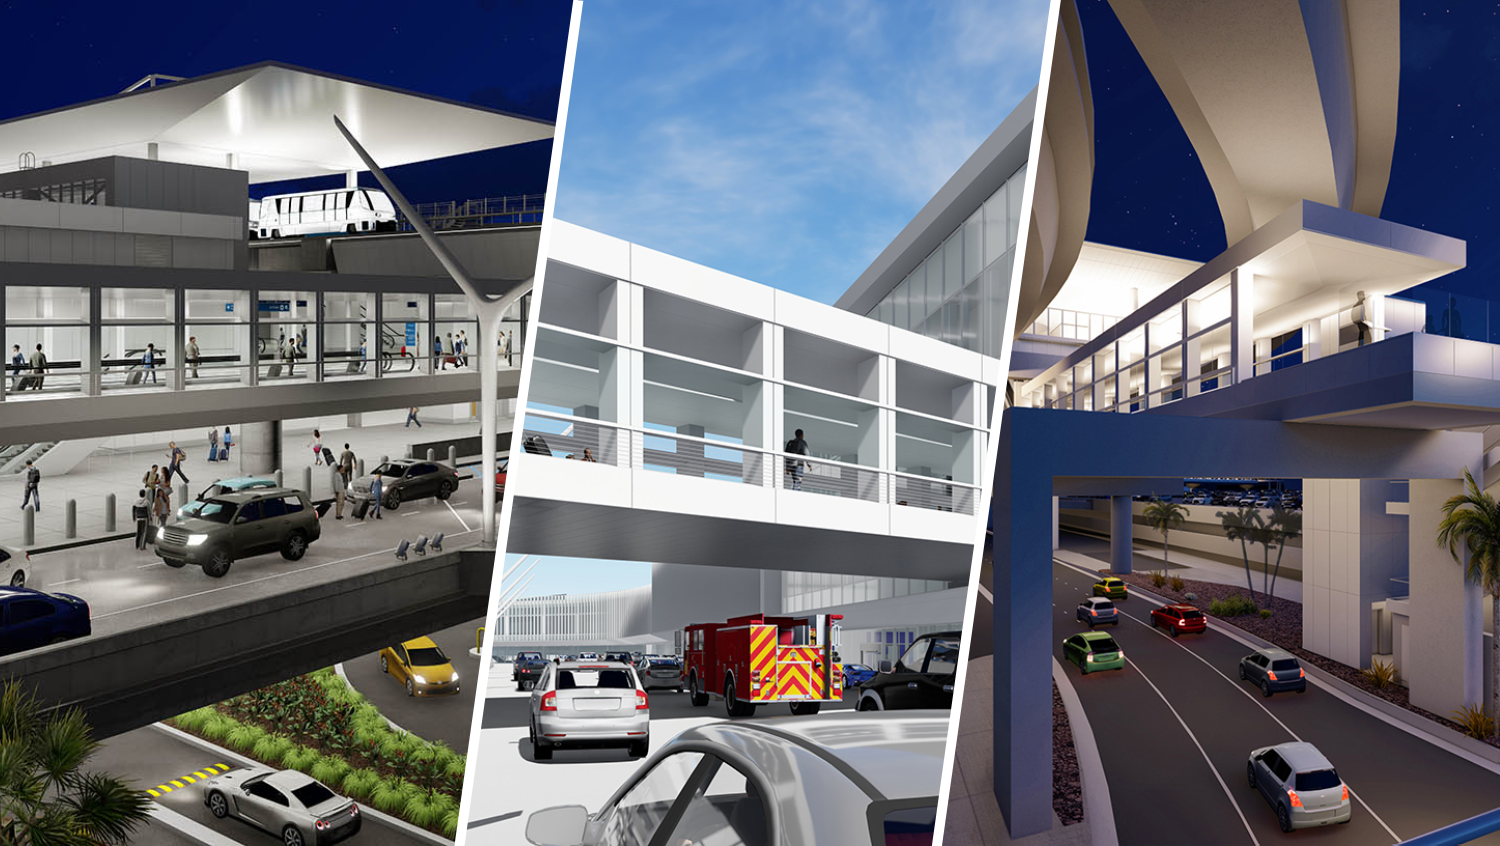 Images: See renderings of the LAX Automated People Mover